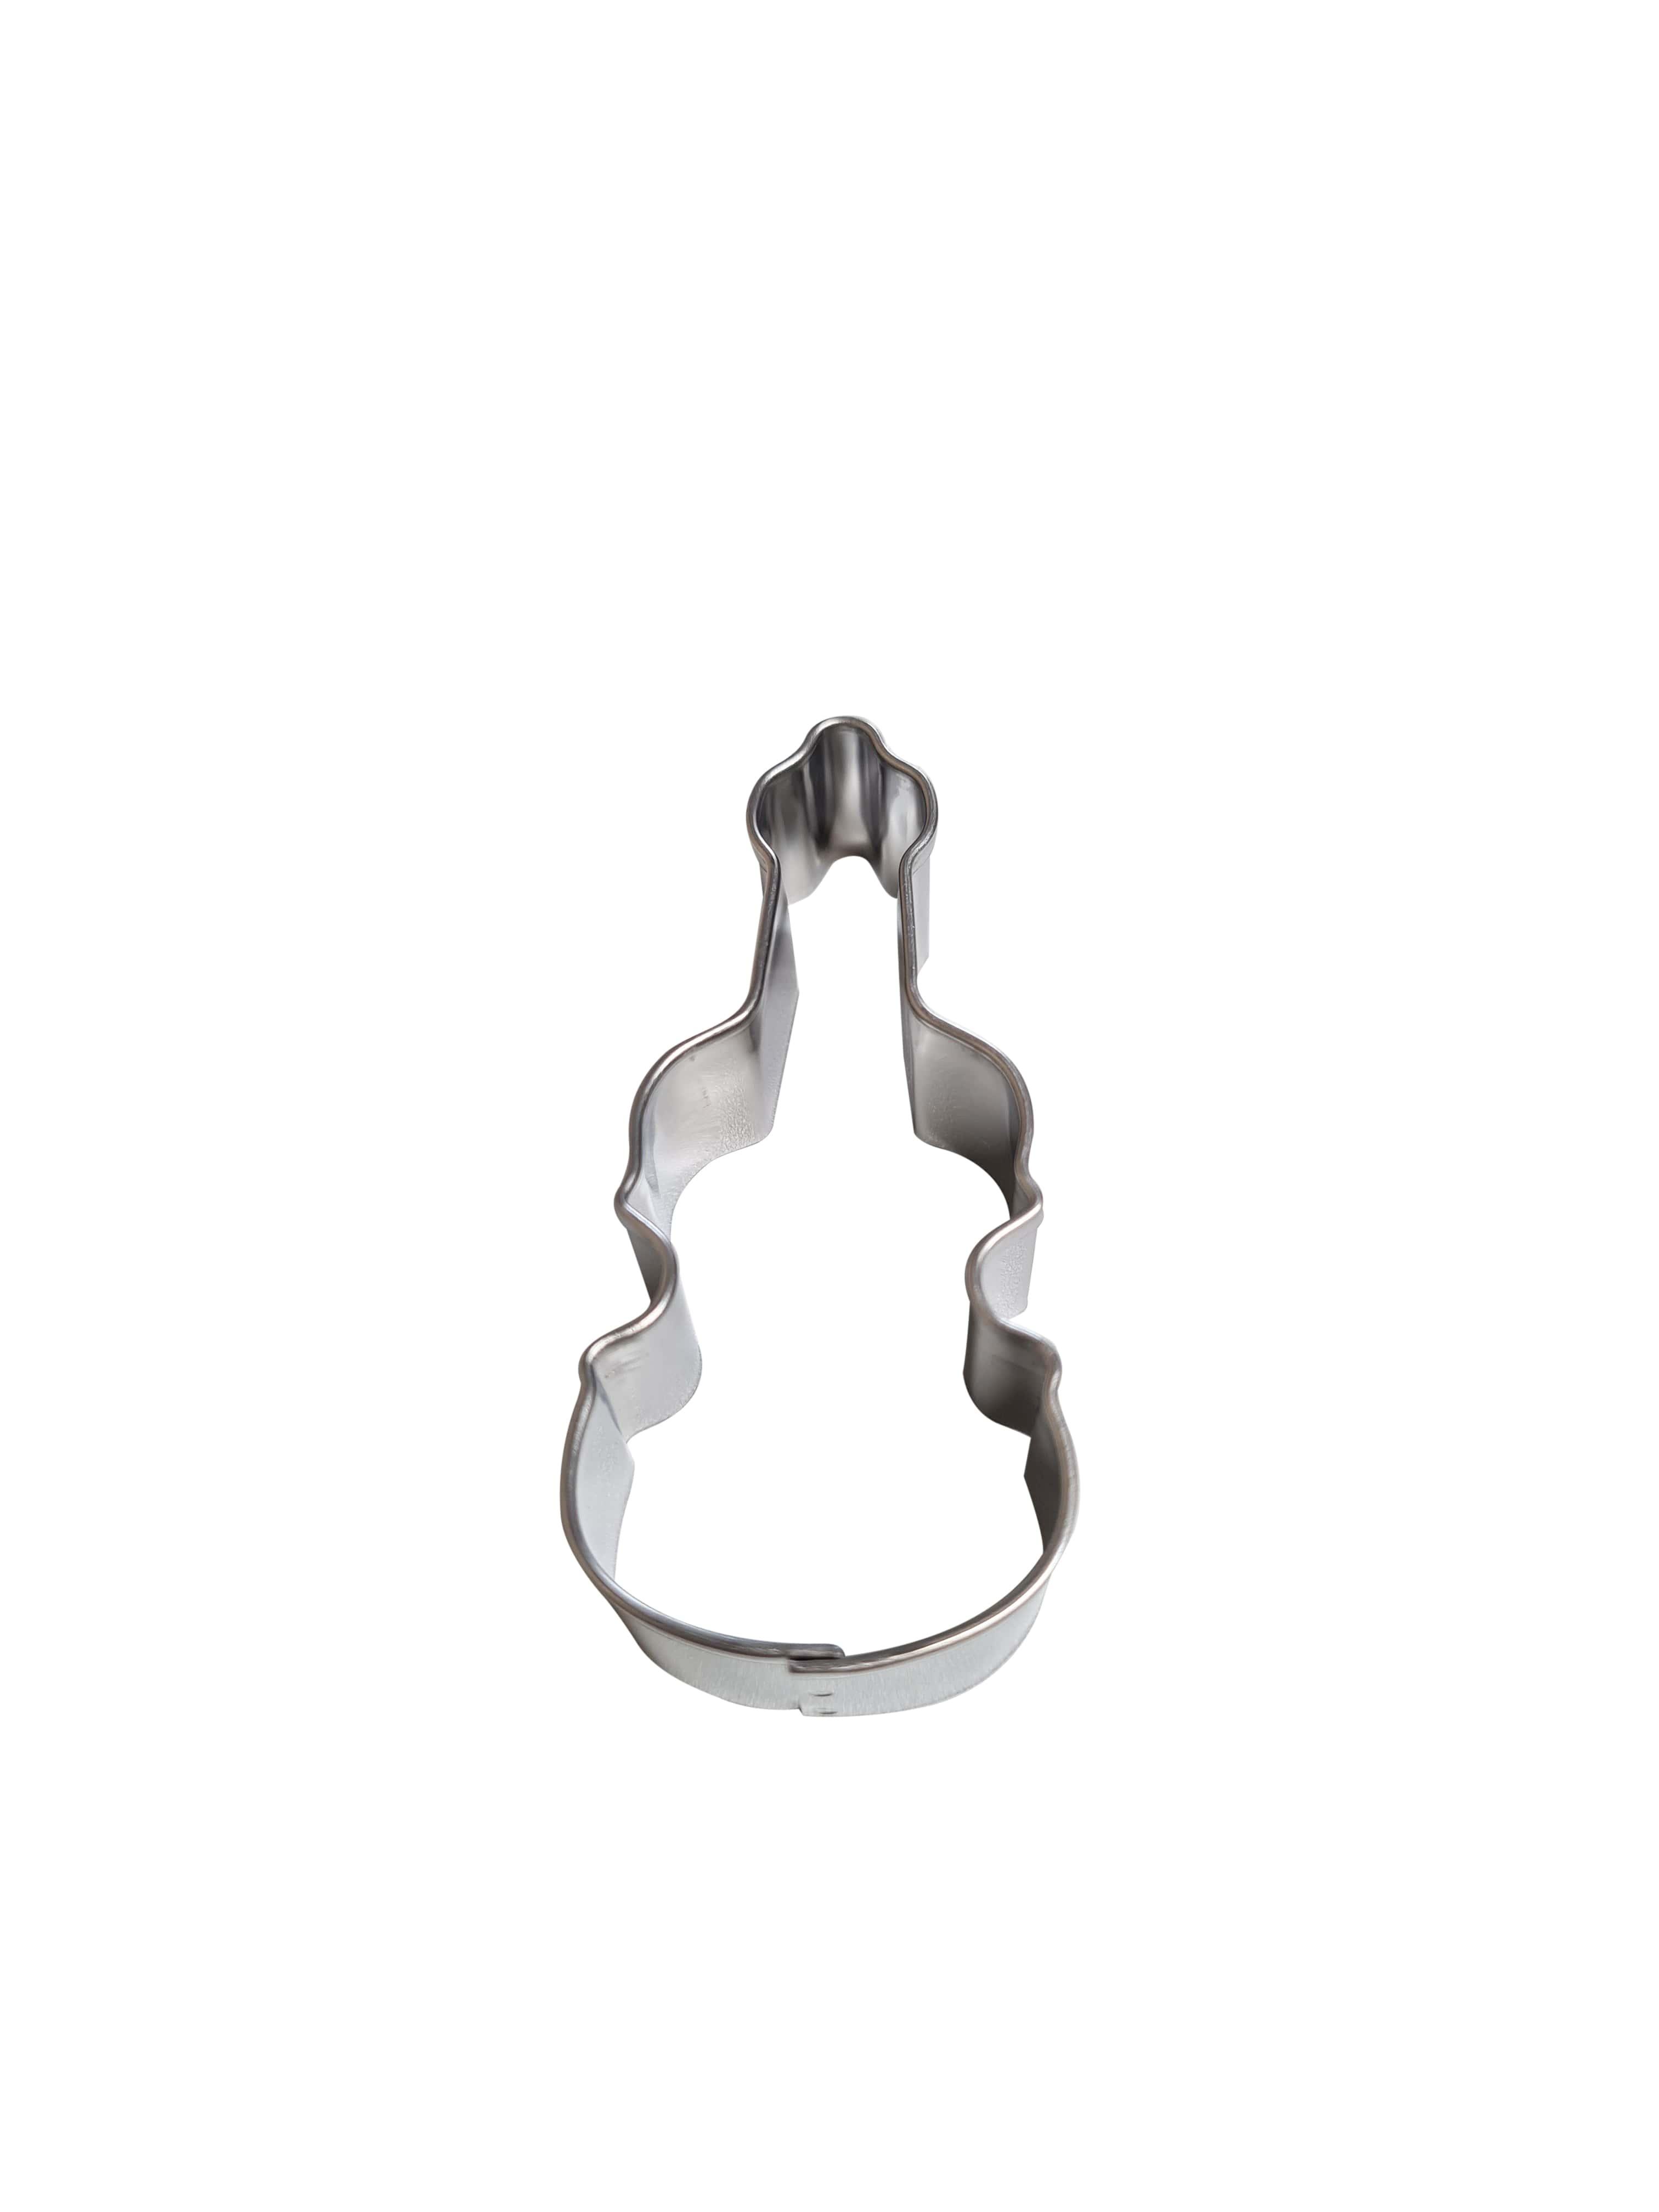 Stainless steel violin cutter